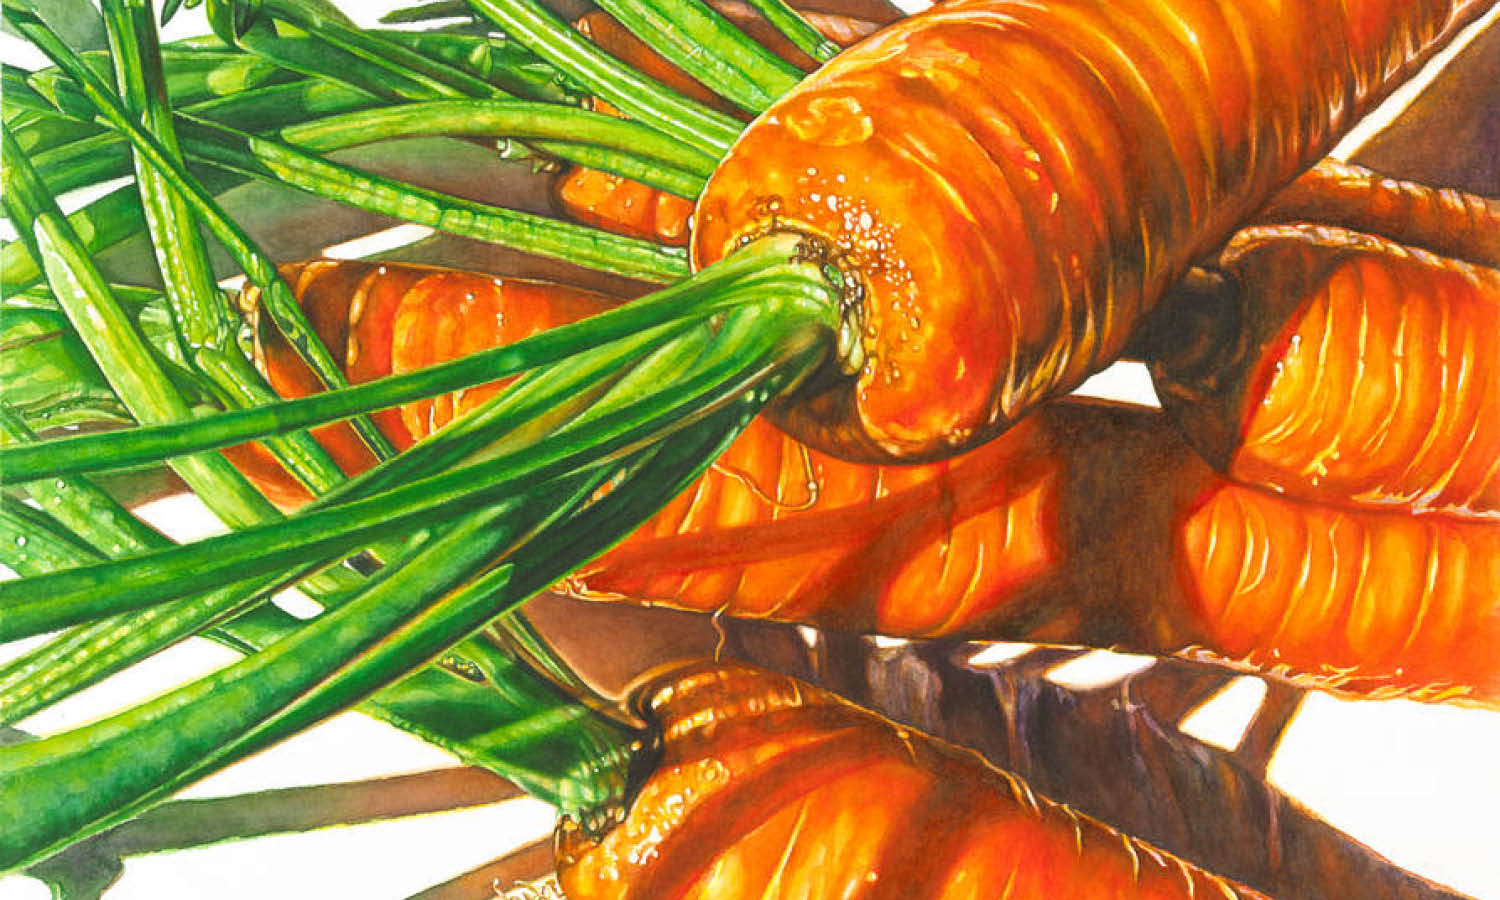 30 Best Carrot Illustration Ideas You Should Check